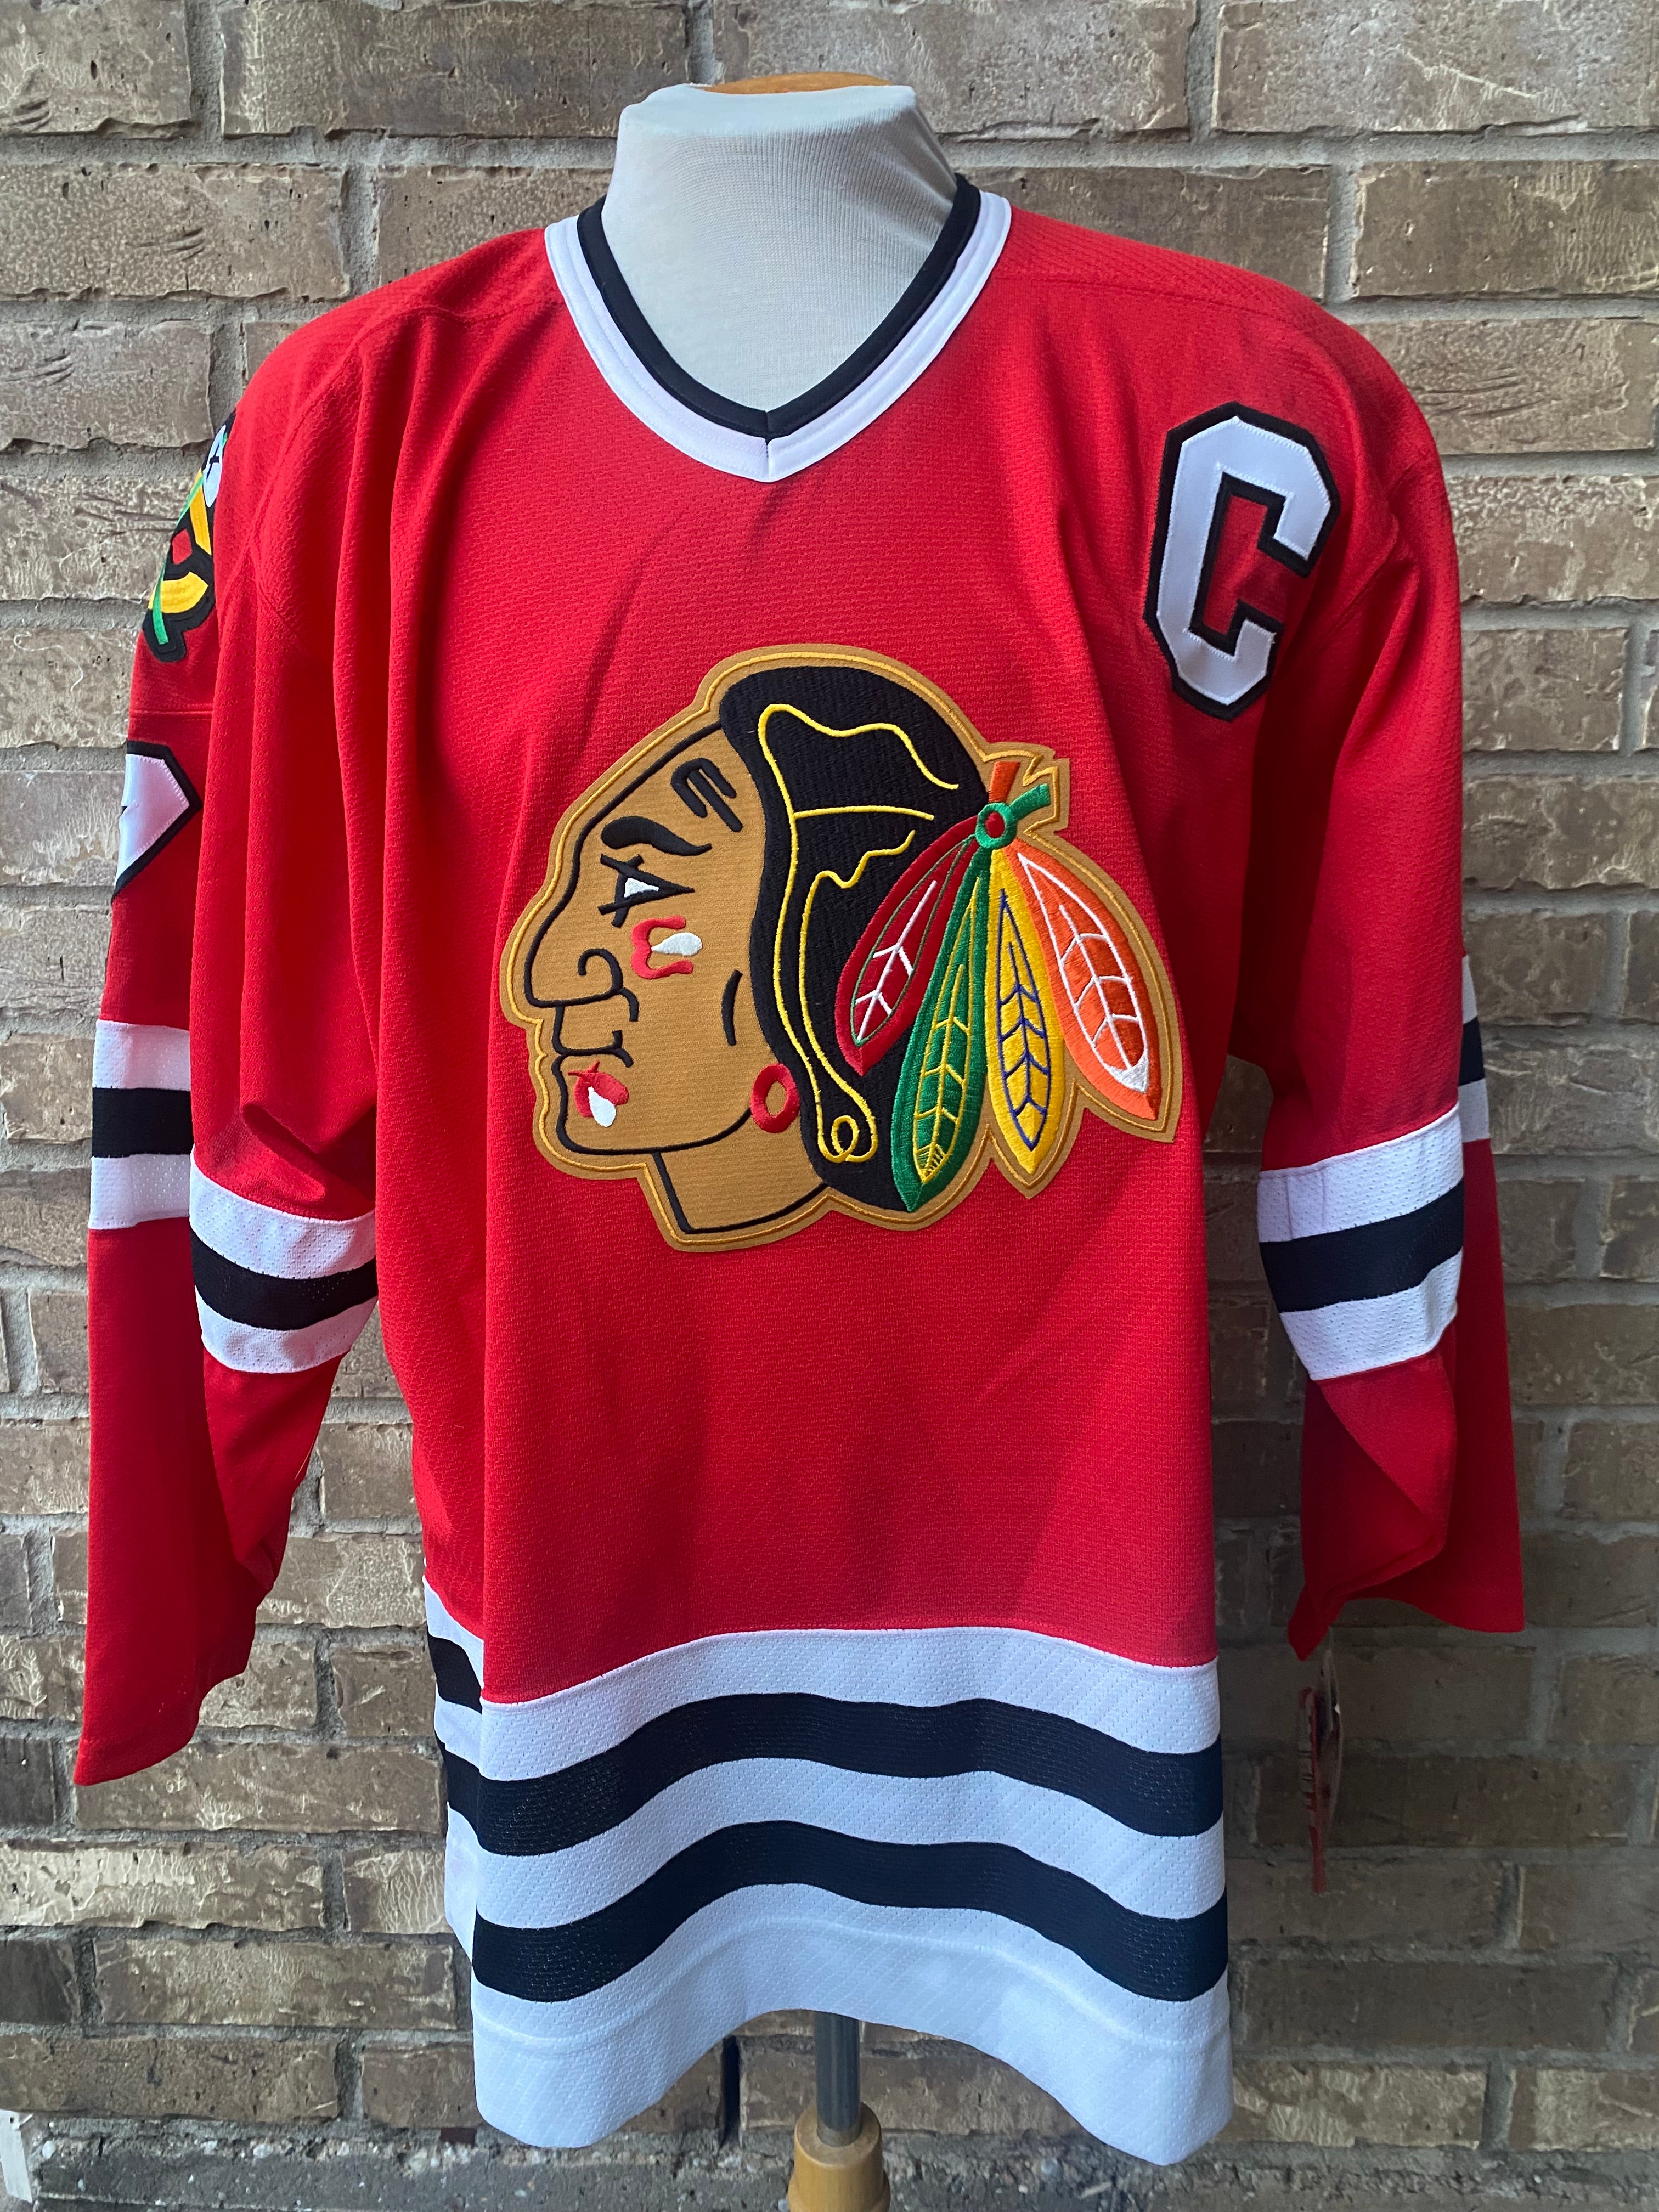 NHL Youth Chicago Blackhawks Team Color Replica Jersey - R58Hwbdd (Red,  X-Large/Large)